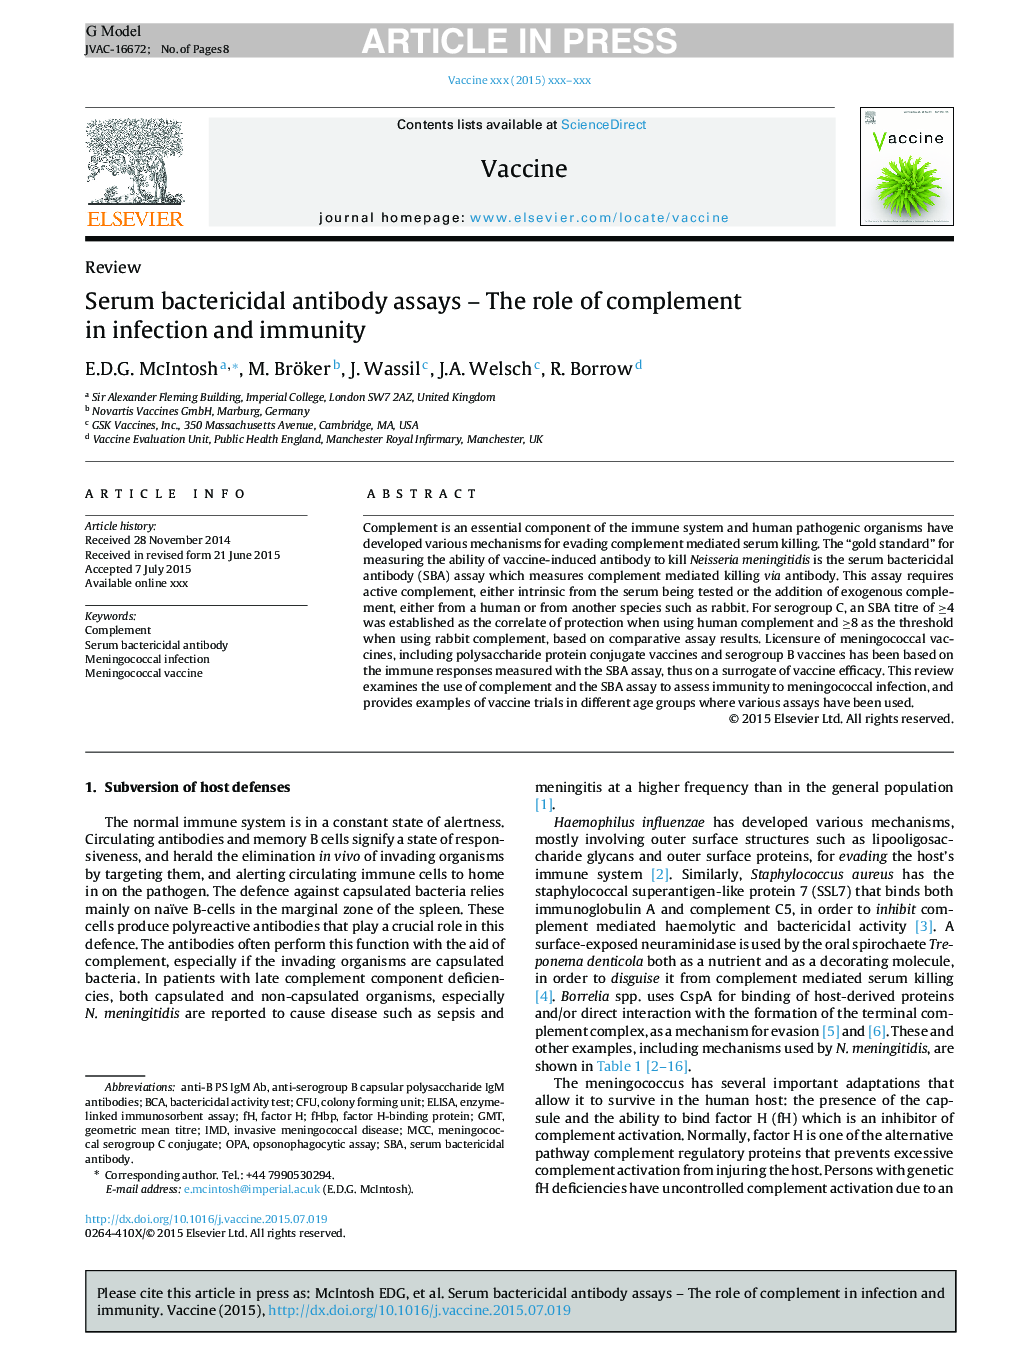 Serum bactericidal antibody assays - The role of complement in infection and immunity